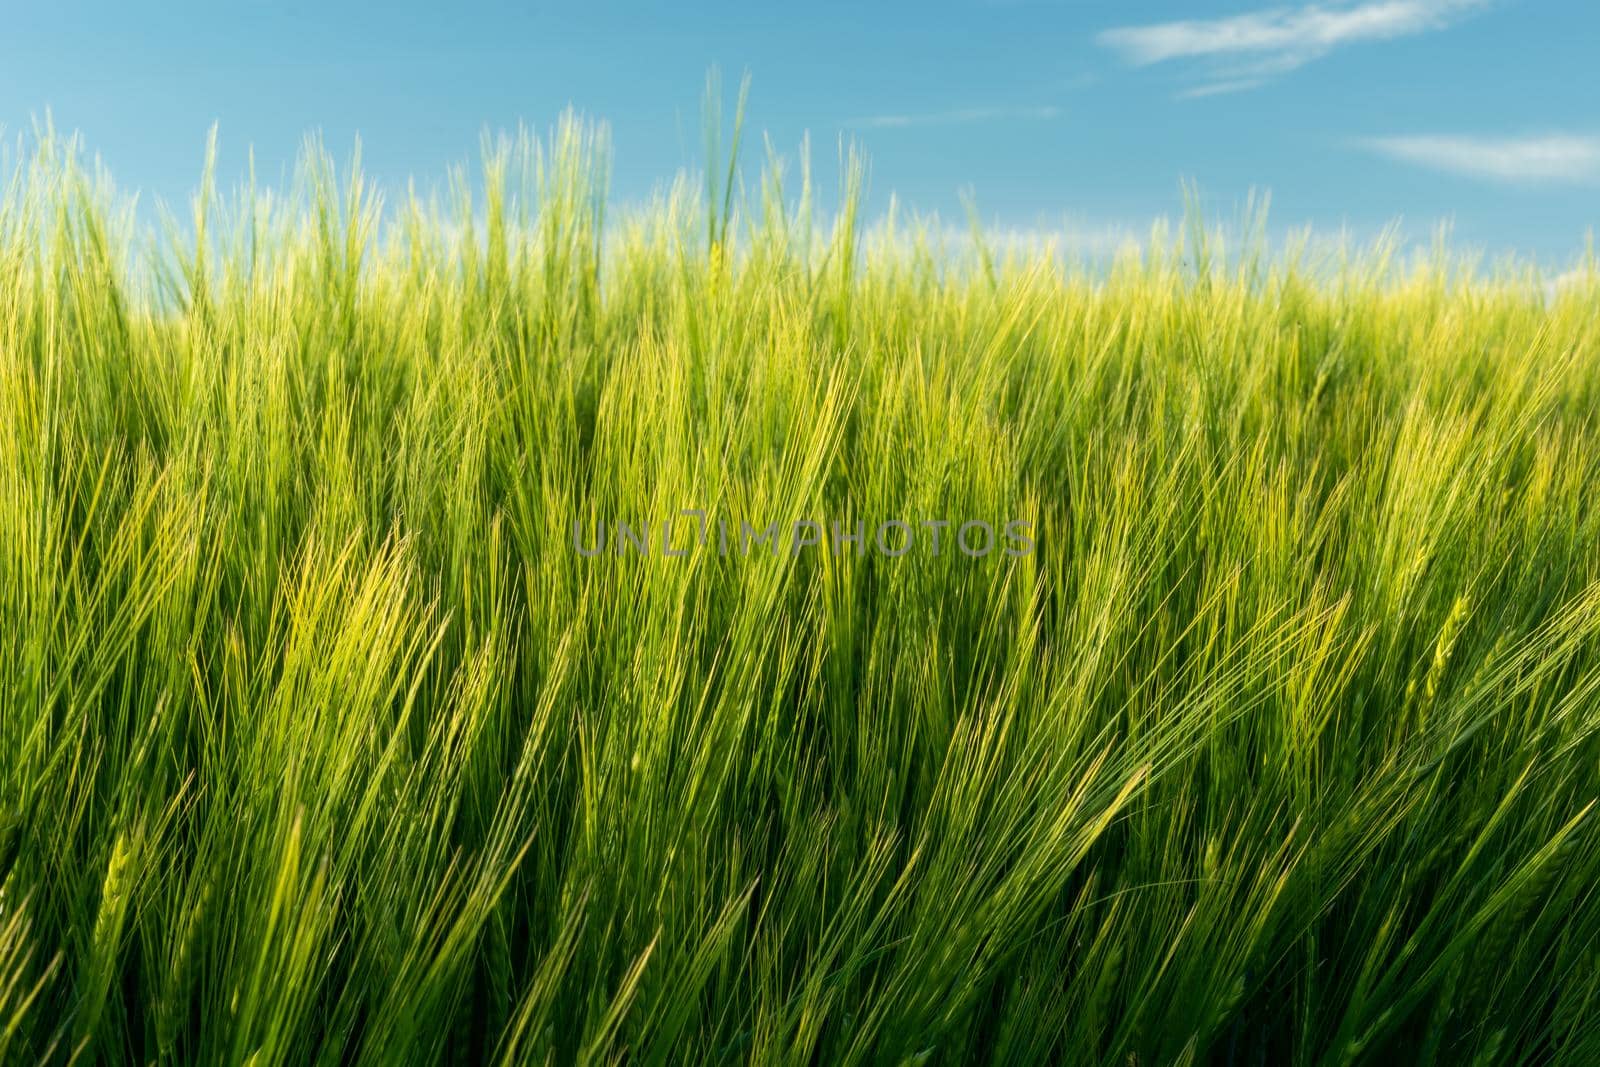 Yellow-green barley grain ears and blue sky, spring view